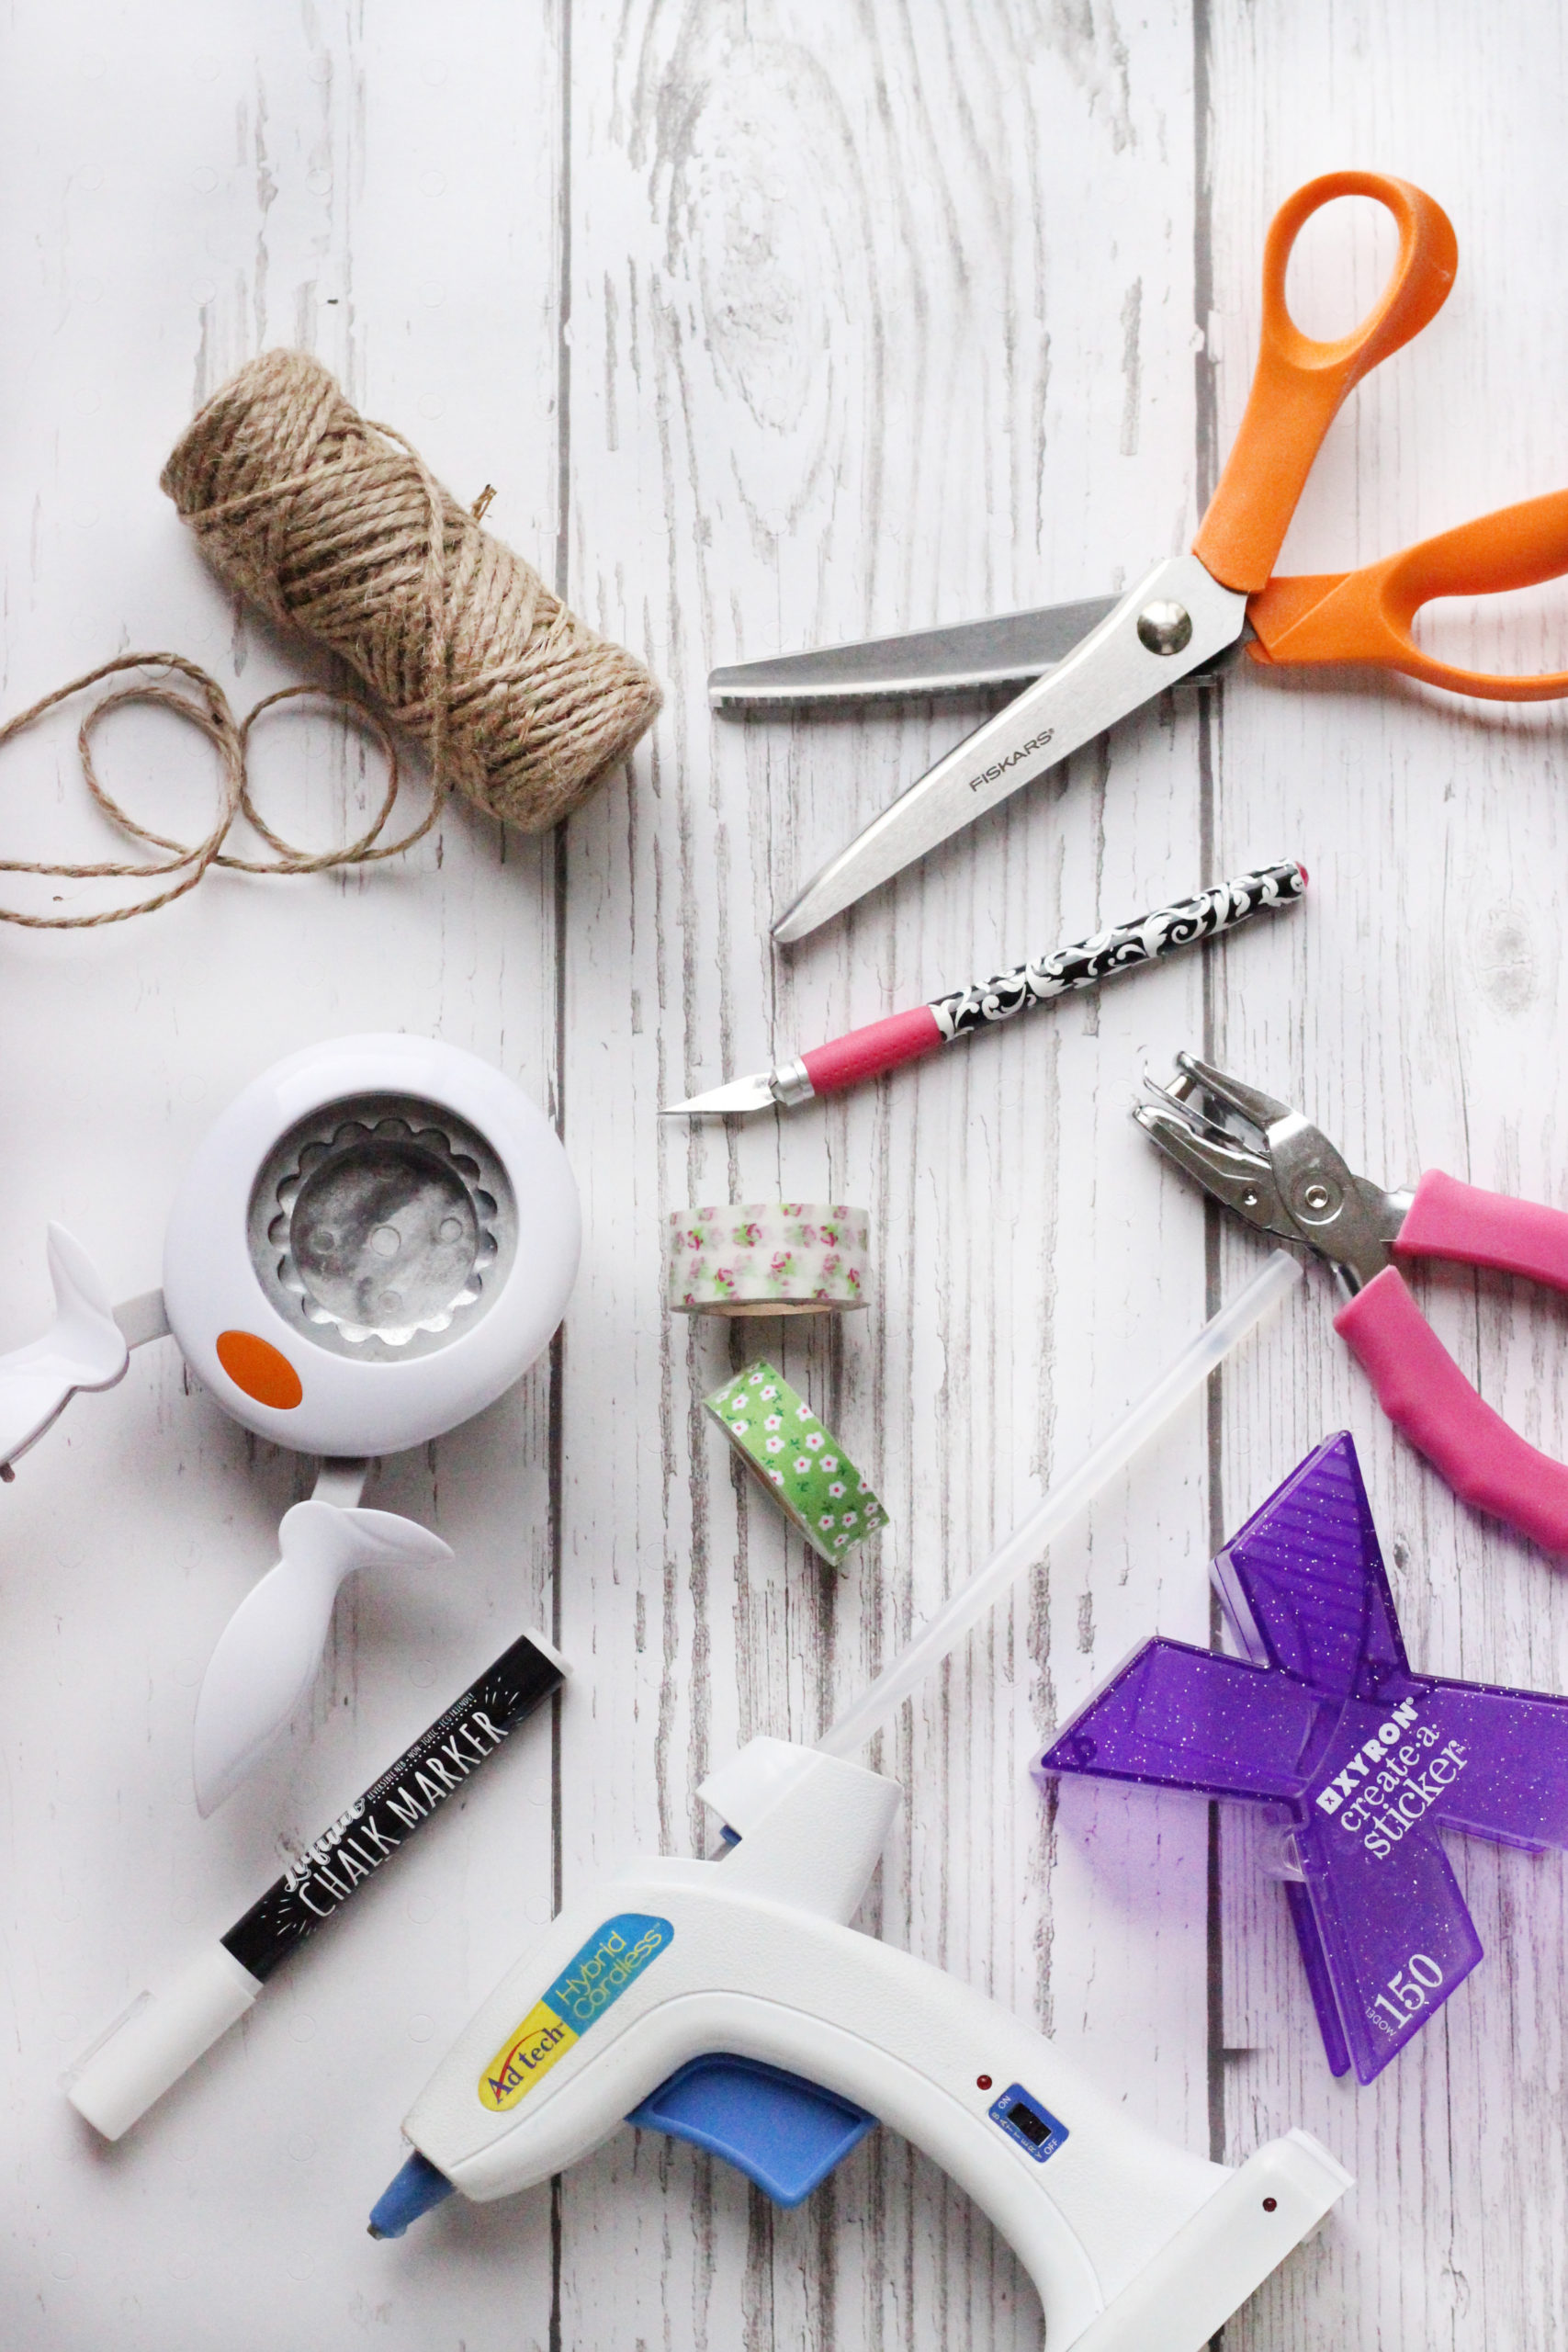 Enhance Your Crafting Experience with These Must-Have Tools